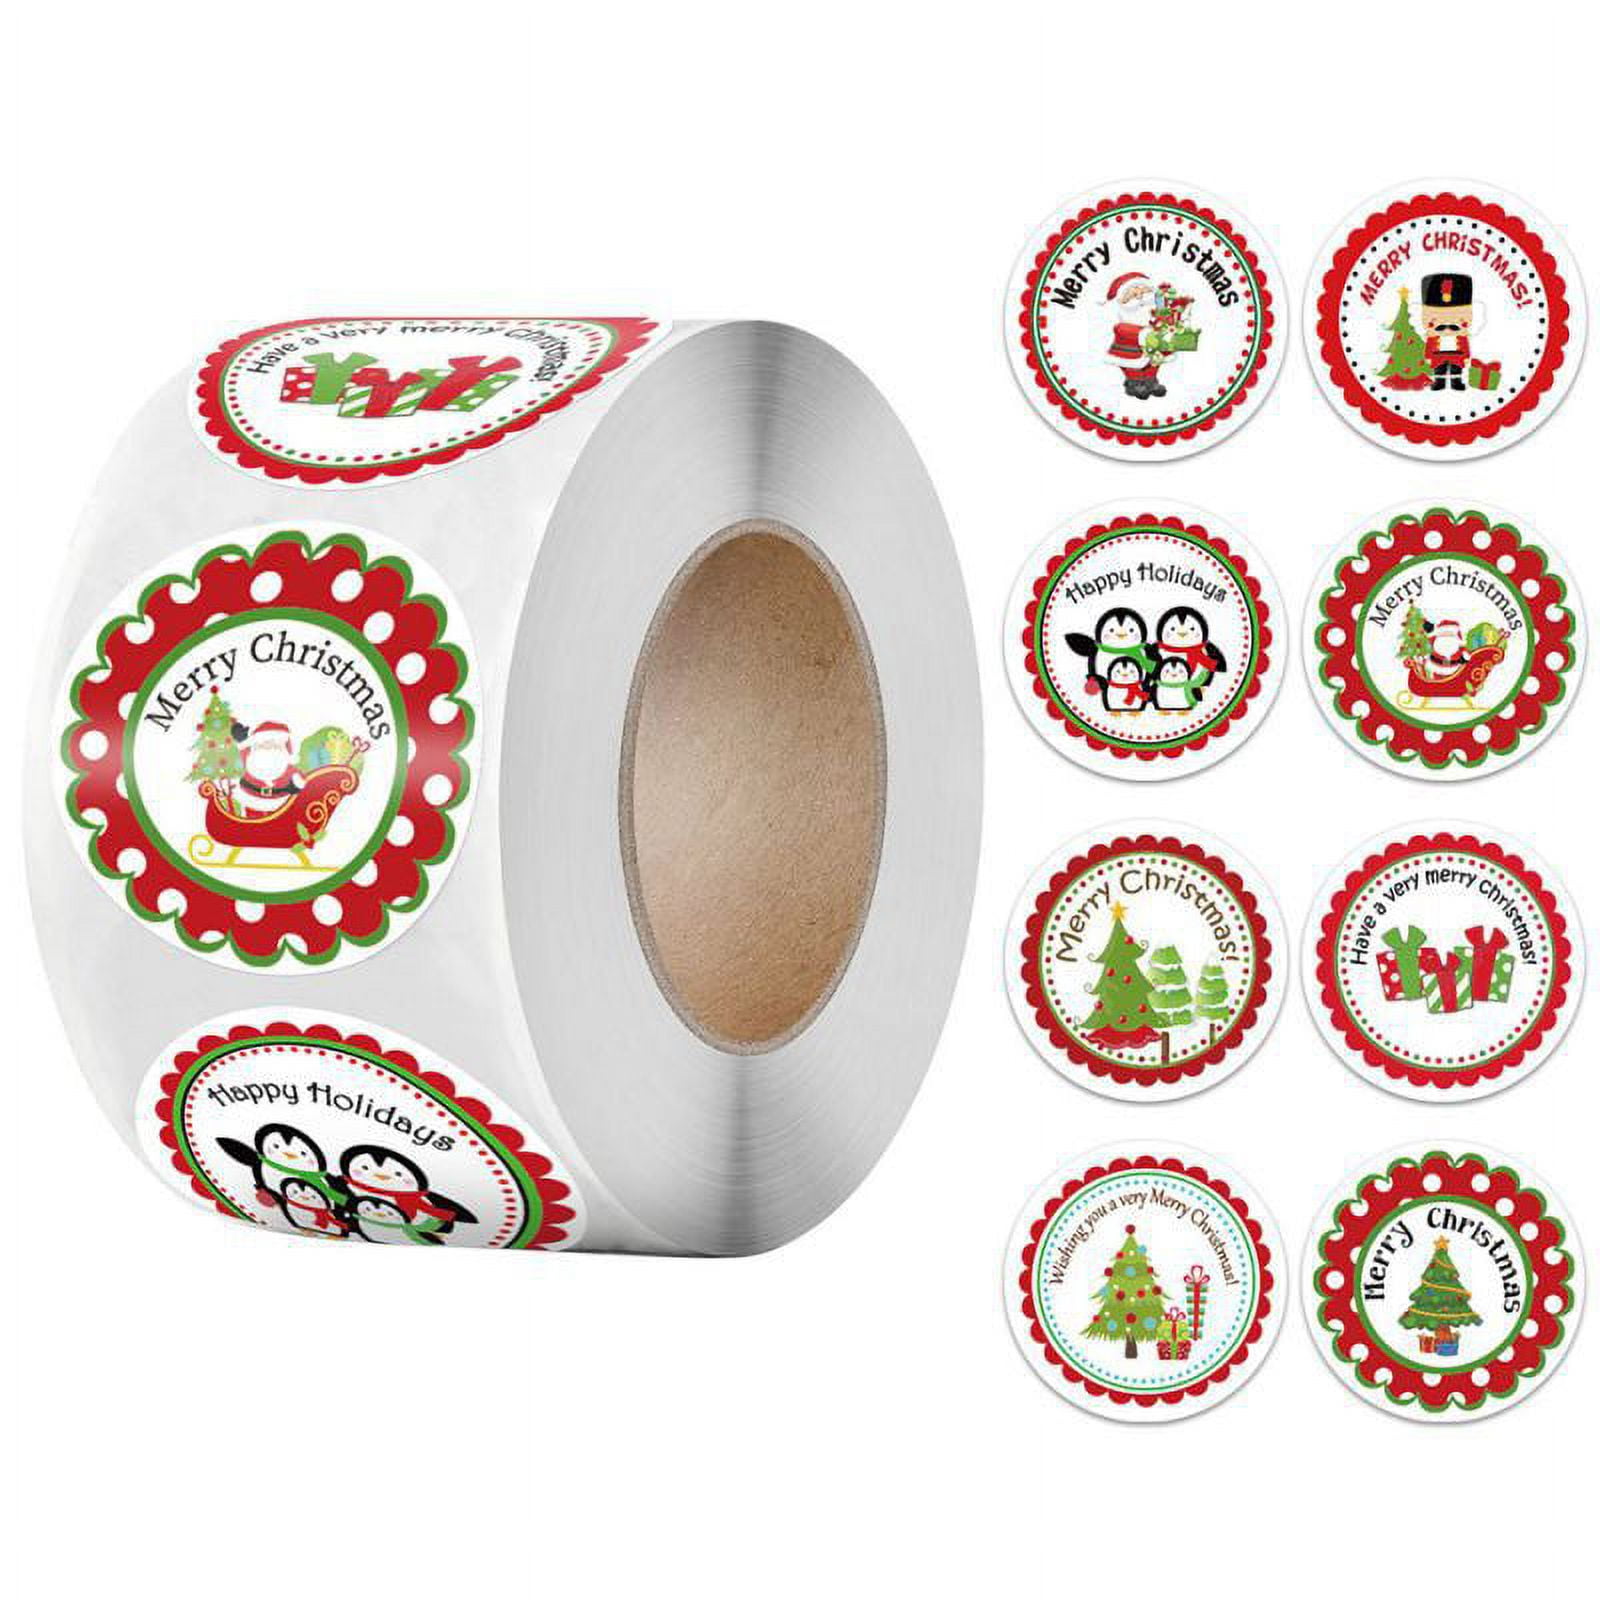 Graphique Peanuts™ Gift Label Rolls | 120 Self-Adhesive Christmas Stickers  | 6 Unique Designs with Red Foil Accents | to and from Names | for Holiday